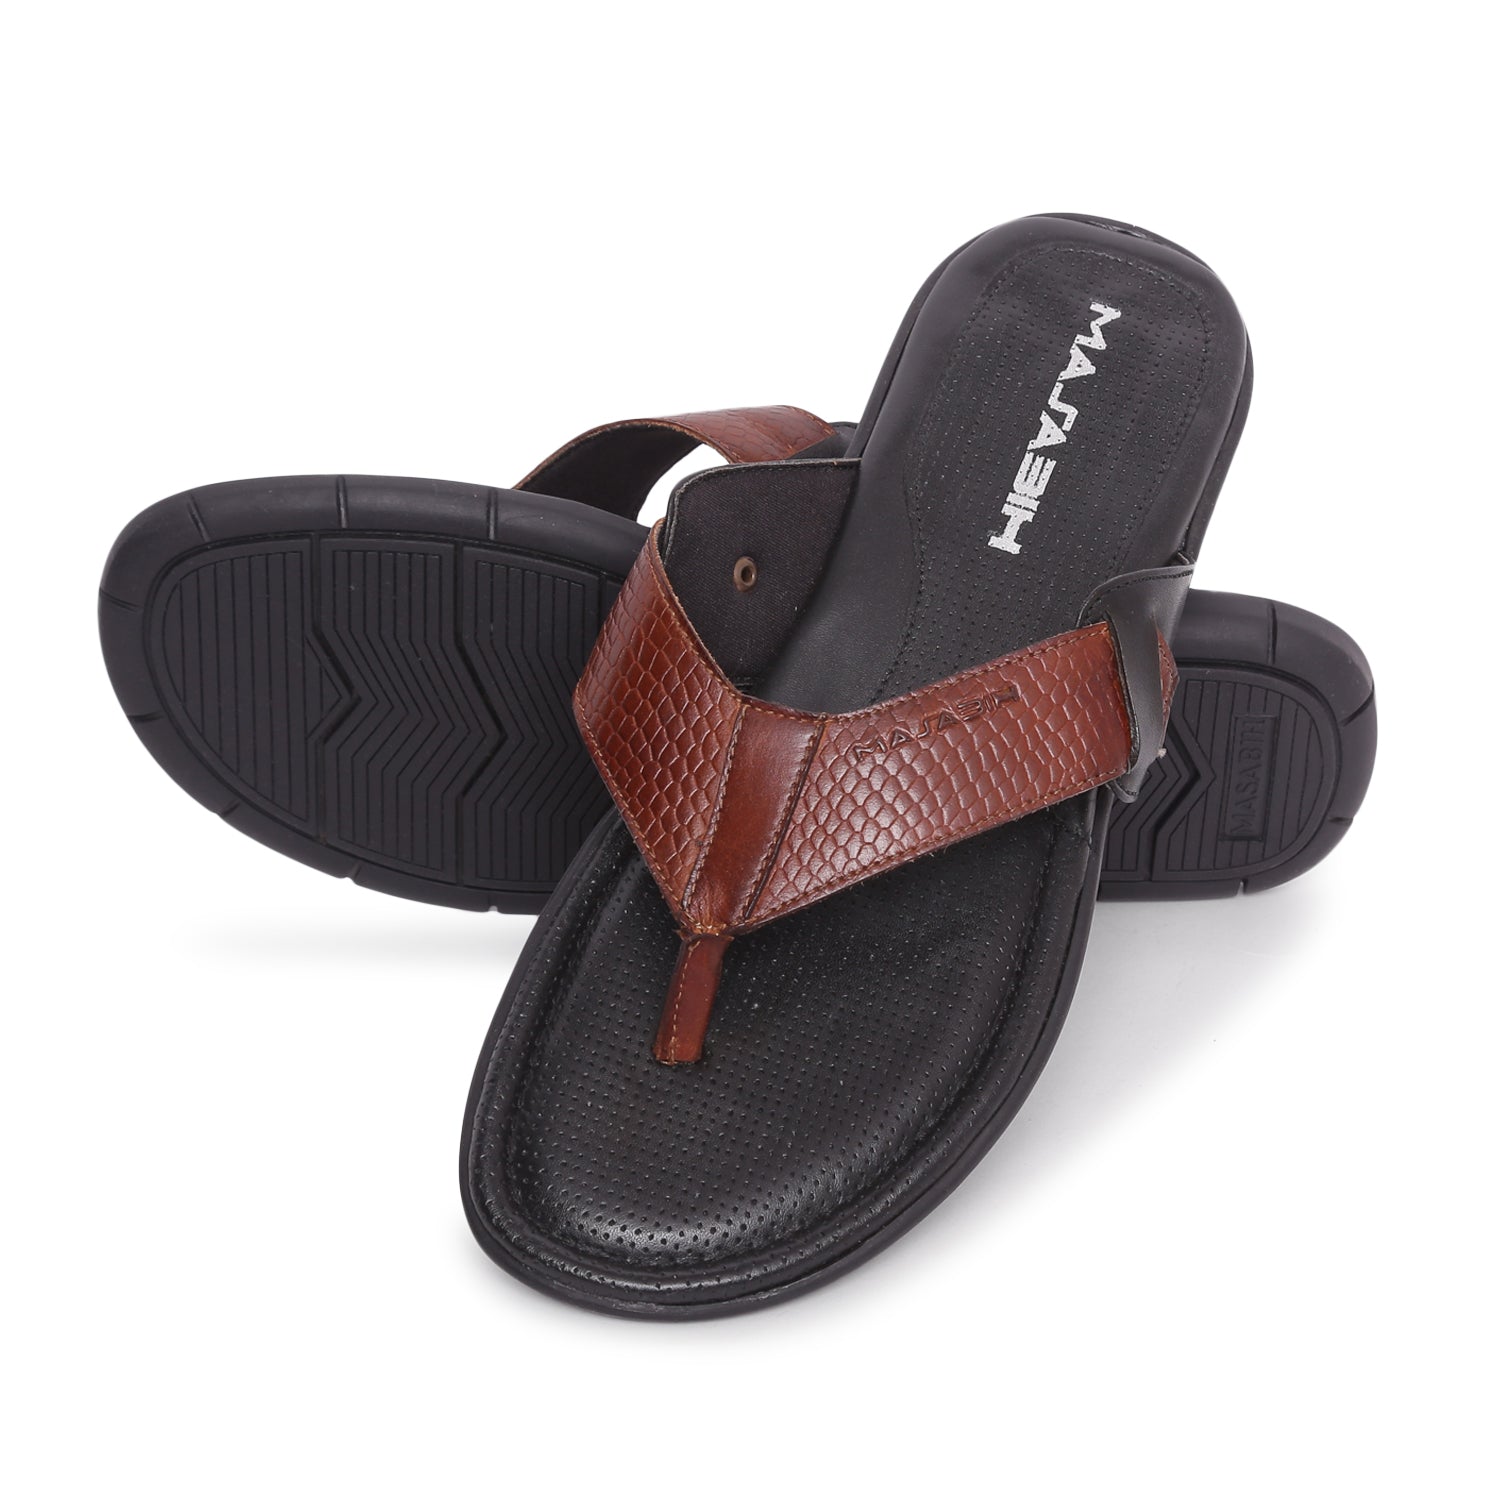 MASABIH Geniune Leather Soft SISSY Print Black / Tan Color modern tauro thong sandals for Mens